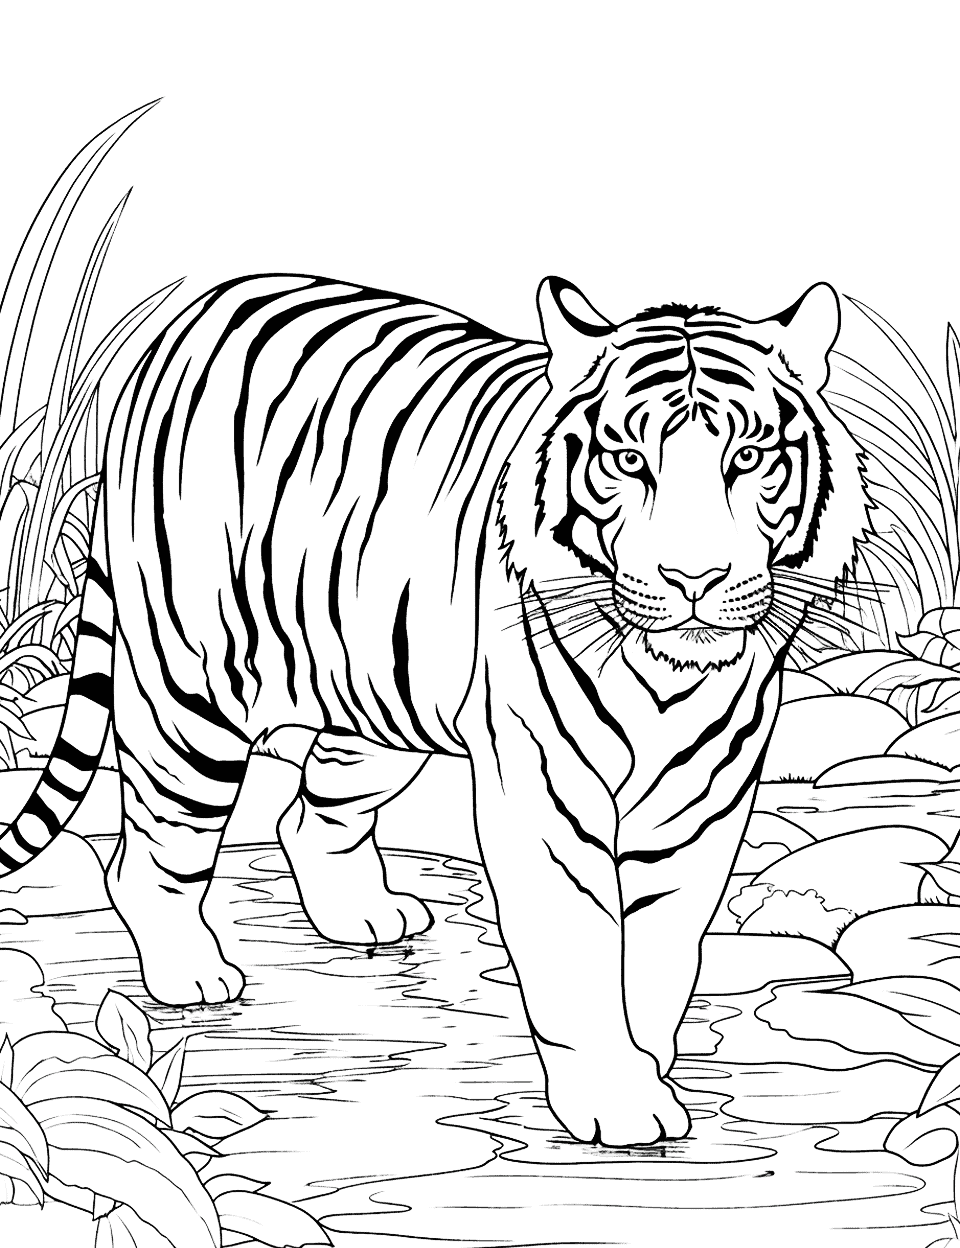 River Crossing Tiger Coloring Page - A tiger cautiously crossing a shallow jungle river.